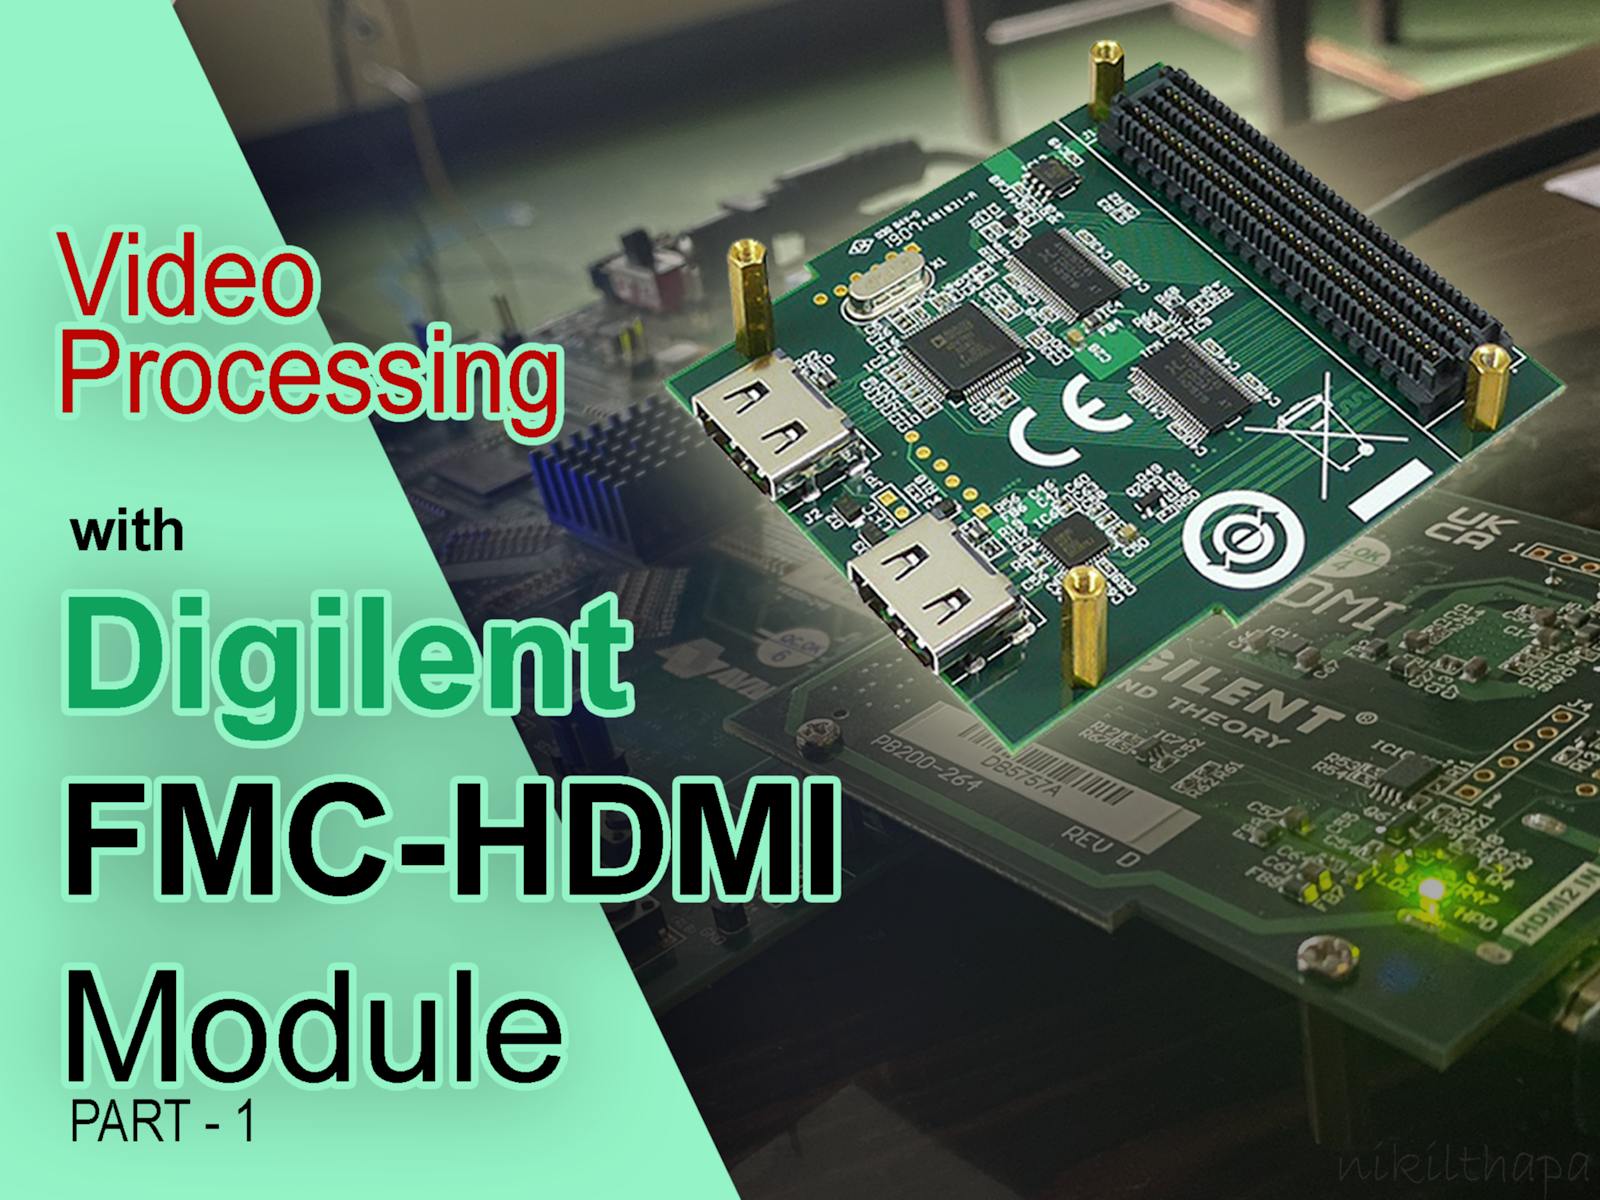 Video Processing with Digilent FMC-HDMI - Part 1